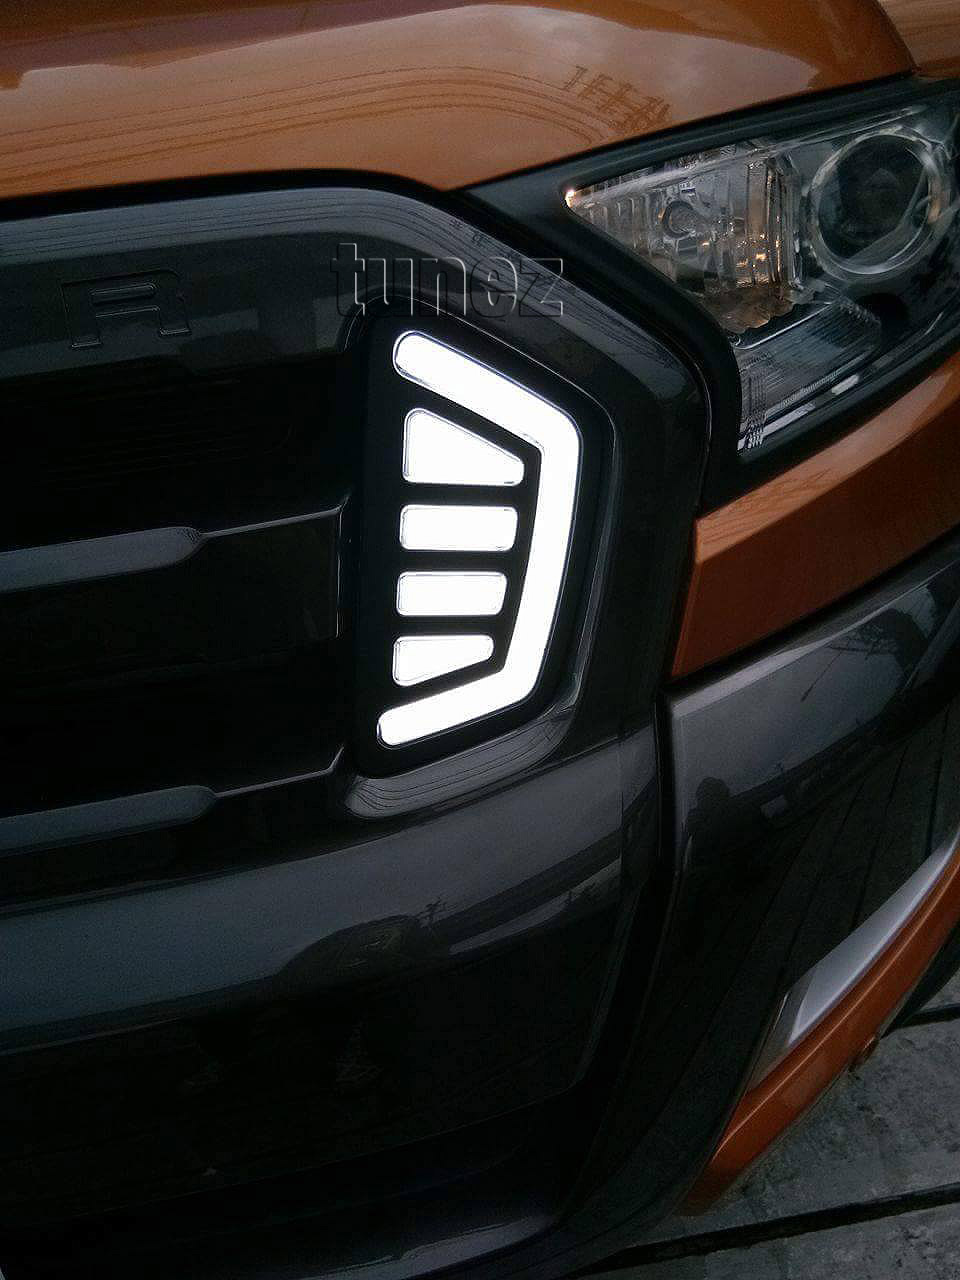 DRL06 Ford Ranger PX2 PX 2 MK2 Series MKII T6 Wildtrak XL XLS XLT Limited 2 LED Light UK United Kingdom USA Australia Europe Daytime Day Running Light DRL Day-Running-Light Lamp Front Lights Light White For Car Aftermarket Pair 2015 2016 2017 2018 Limited2 Limited Grill